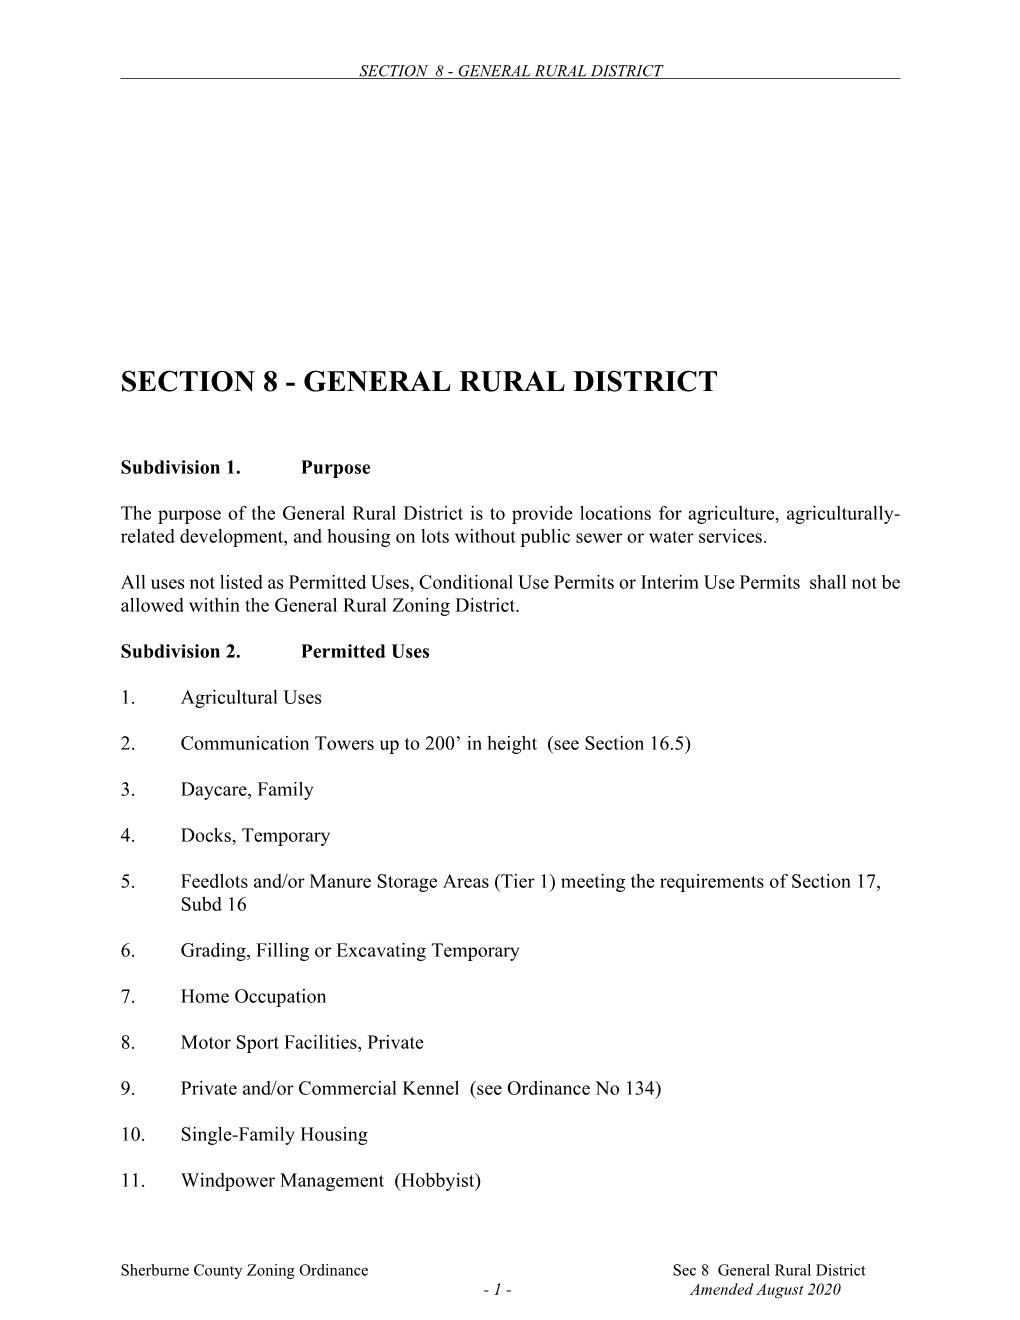 Section 8 - General Rural District